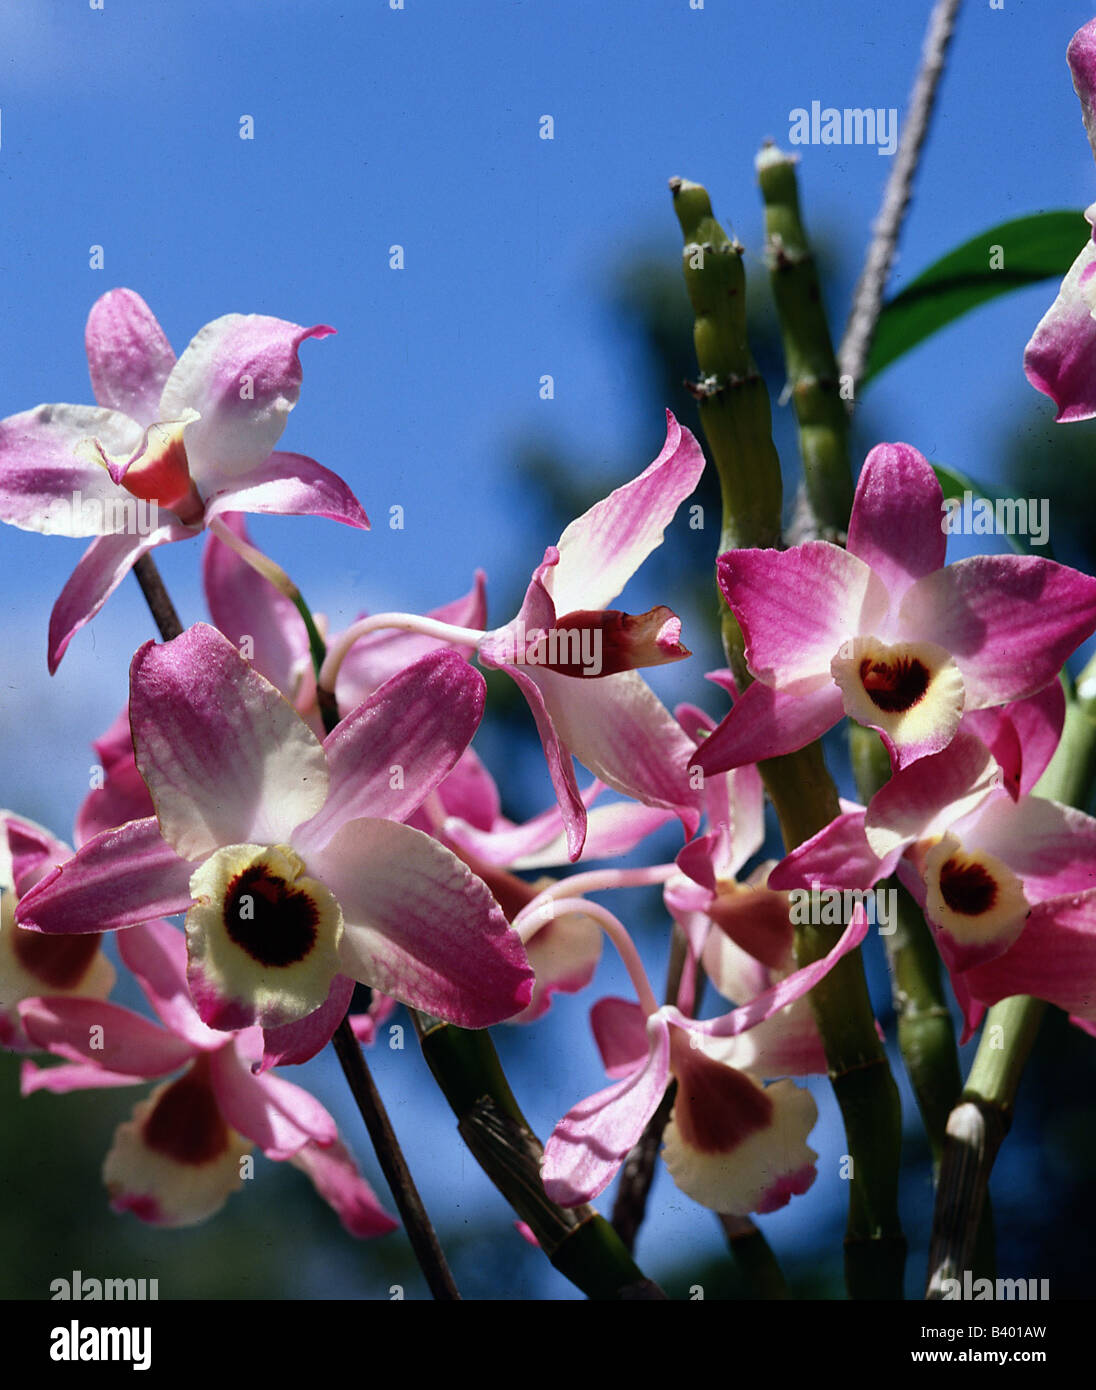 botany, Dendrobium, Dendrobium hybride, blossoms, llen malonies x fort nobel, breed, cross breed, orchid, Orchidaceae, Liliidae, Stock Photo